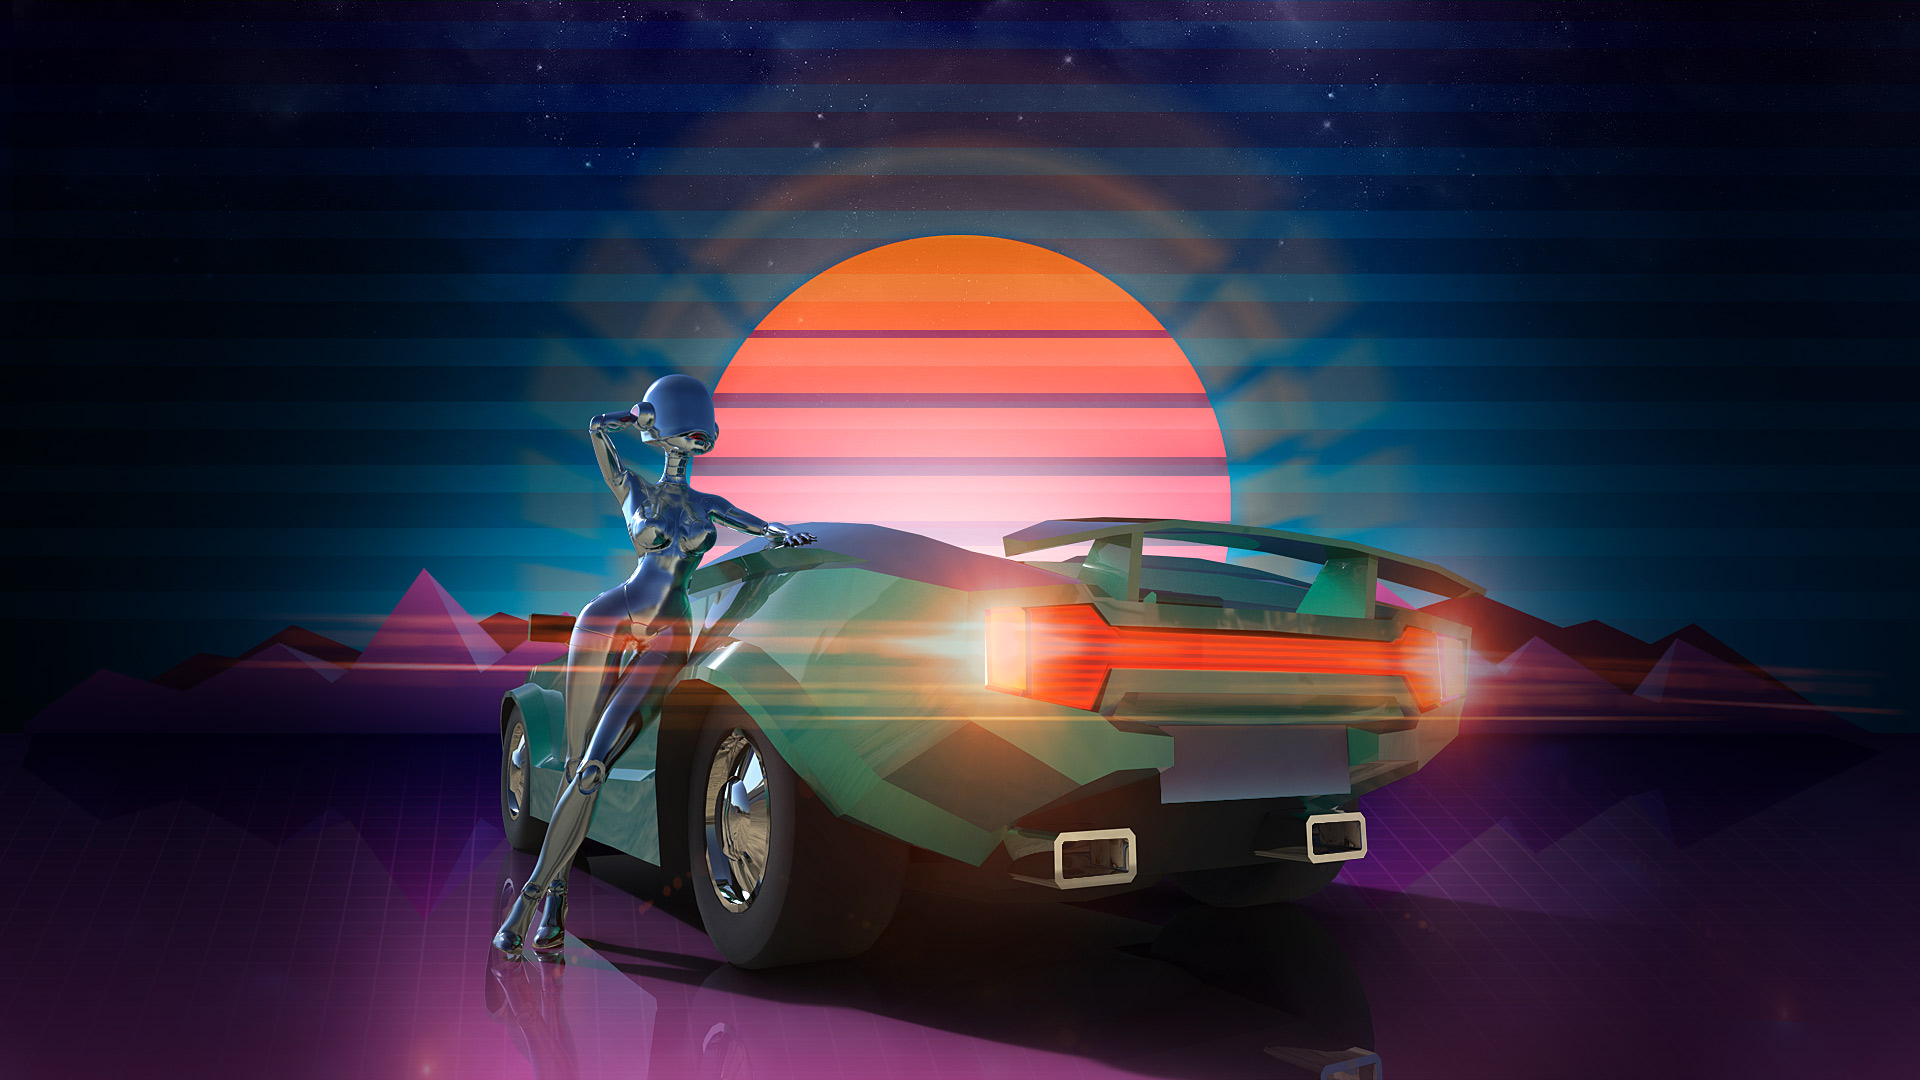 Drive In Wallpapers